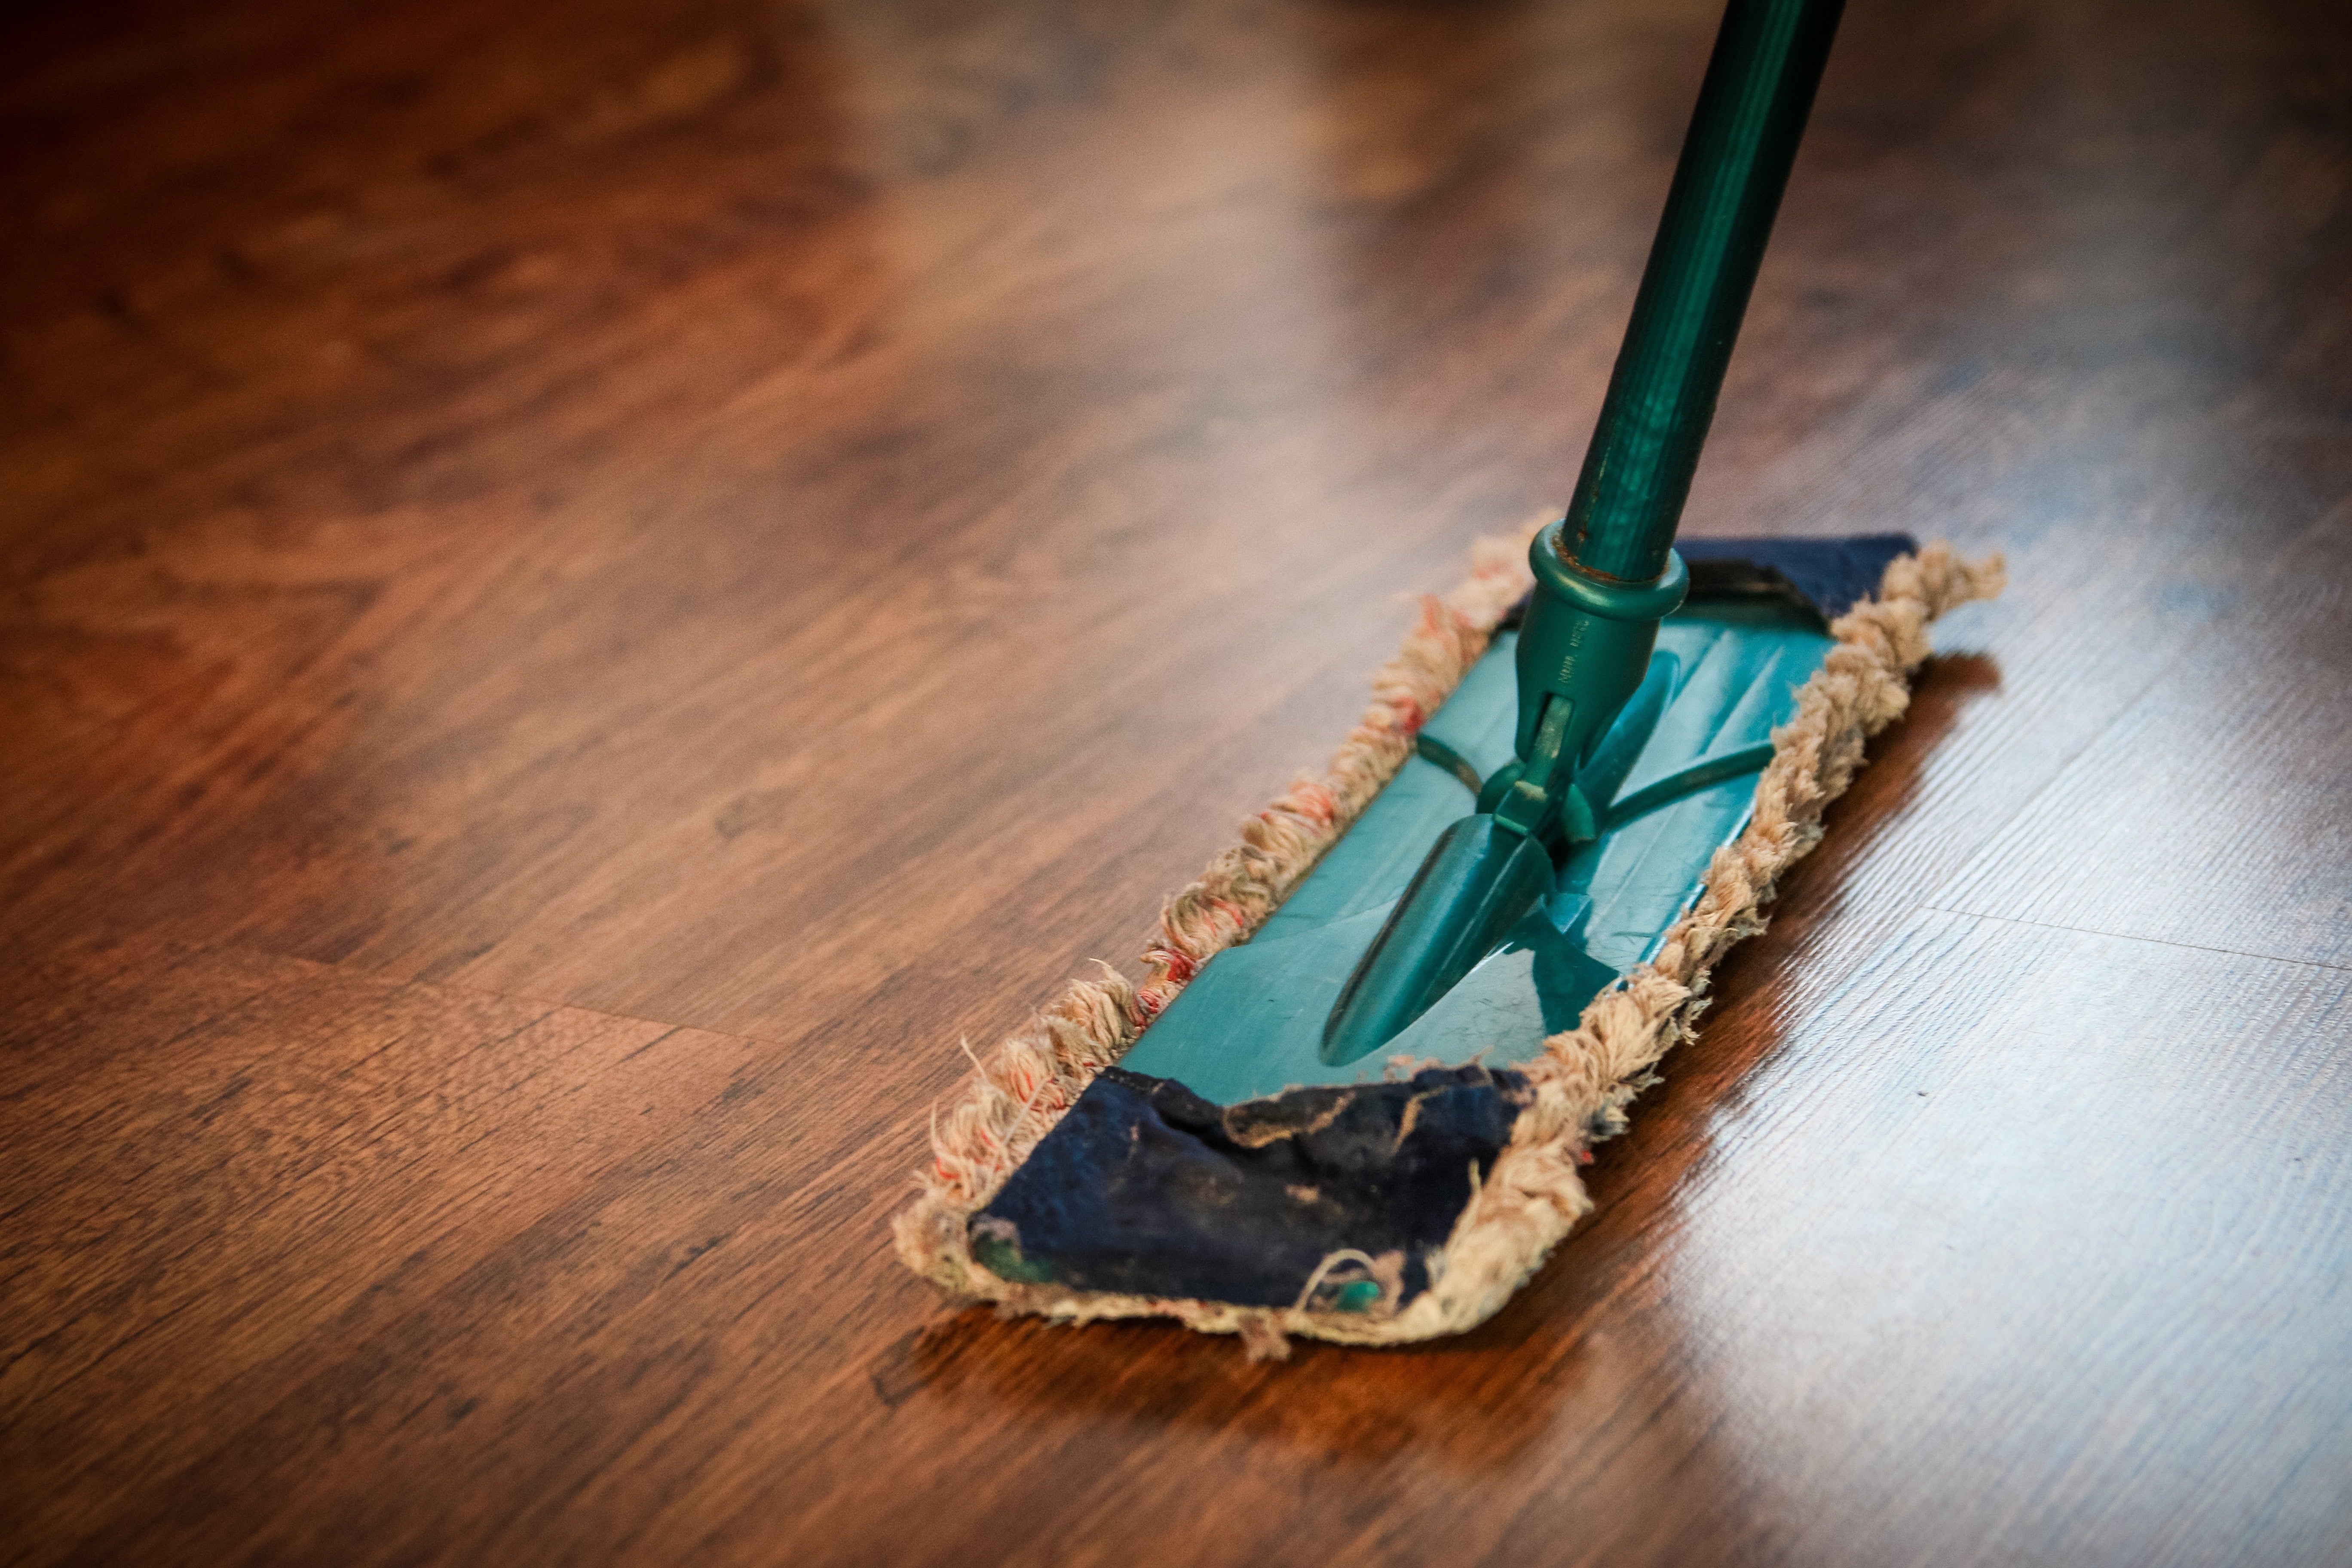 Alt.tag: Cleaning floors. Caption: Make your floors spotless if you want to make a good impression.Photo by Pixabay: https://www.pexels.com/photo/brown-wooden-floor-48889/